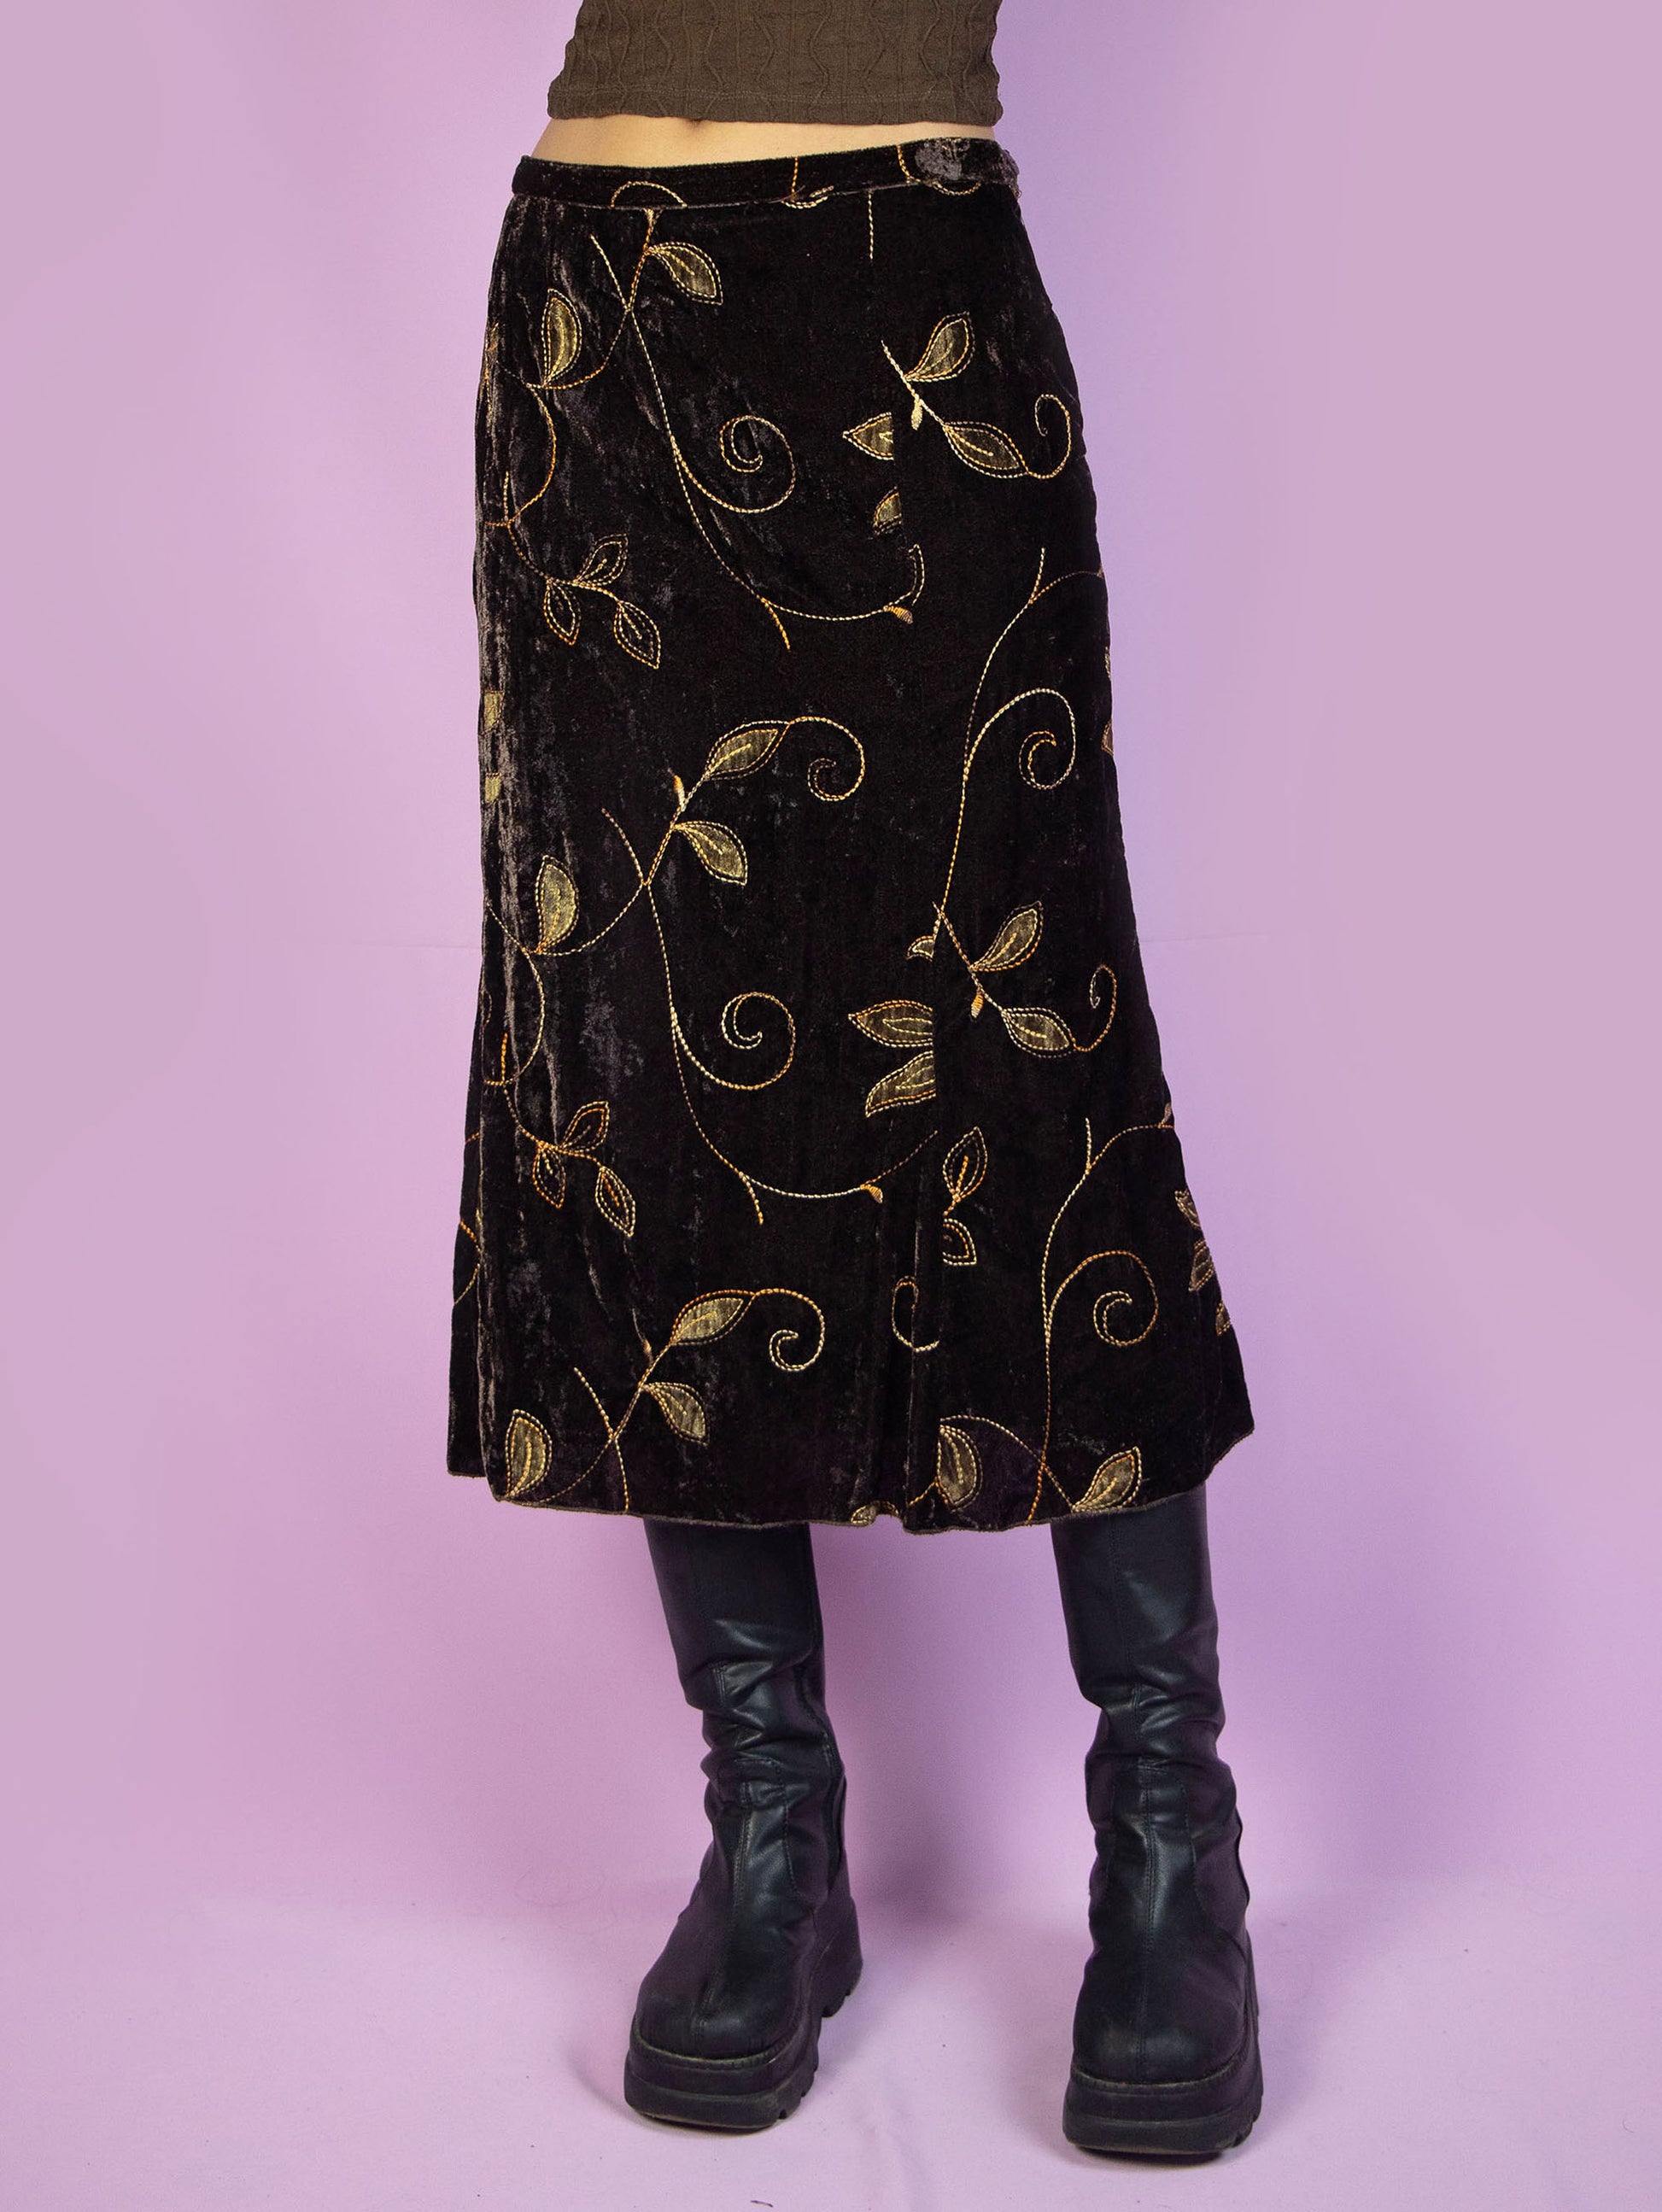 The Vintage 90s Brown Velvet Midi Skirt is a dark brown velvet flared skirt with floral embroidered details and side zipper closure. Gorgeous fairy grunge whimsygoth style 1990s boho skirt.